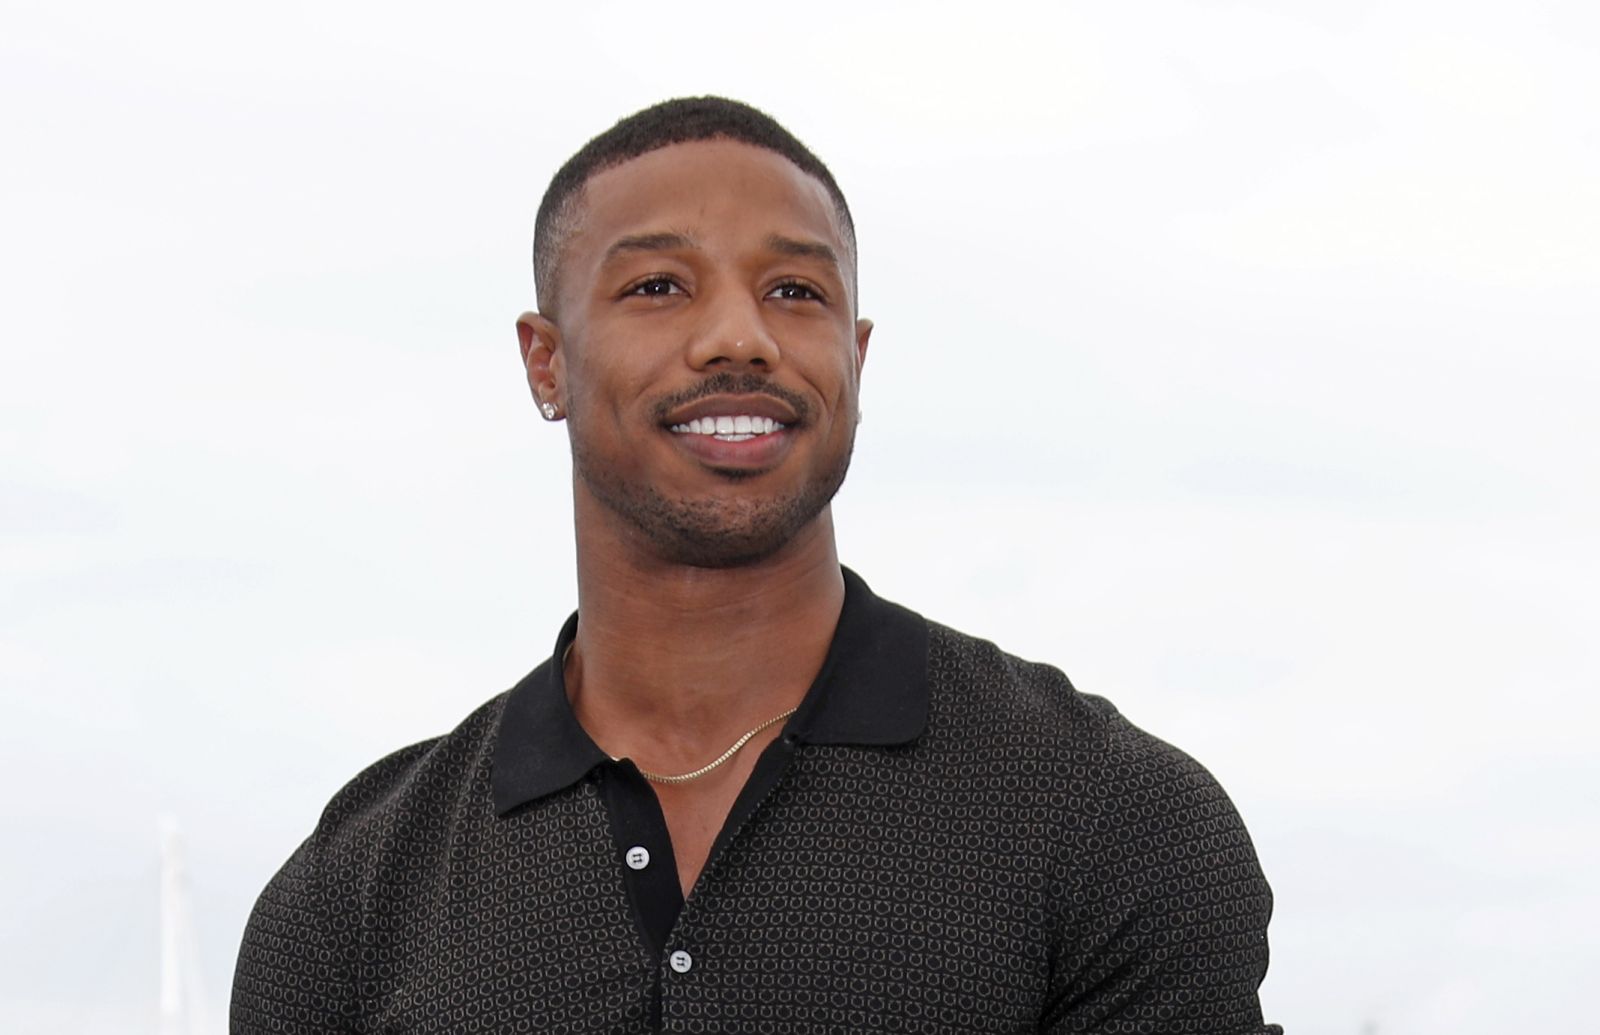 epa08826978 (FILE) - US actor Michael B. Jordan poses during the photocall for 'Farenheit 451' at the 71st annual Cannes Film Festival, in Cannes, France, 12 May 2018 (reissued 18 November 2020). According to media reports, US People magazine has chosen Michael B. Jordan as this year's man with the greatest sex appeal in the world. The magazine selects a Sexiest man Alive since 1985.  EPA/FRANCK ROBICHON *** Local Caption *** 54327477